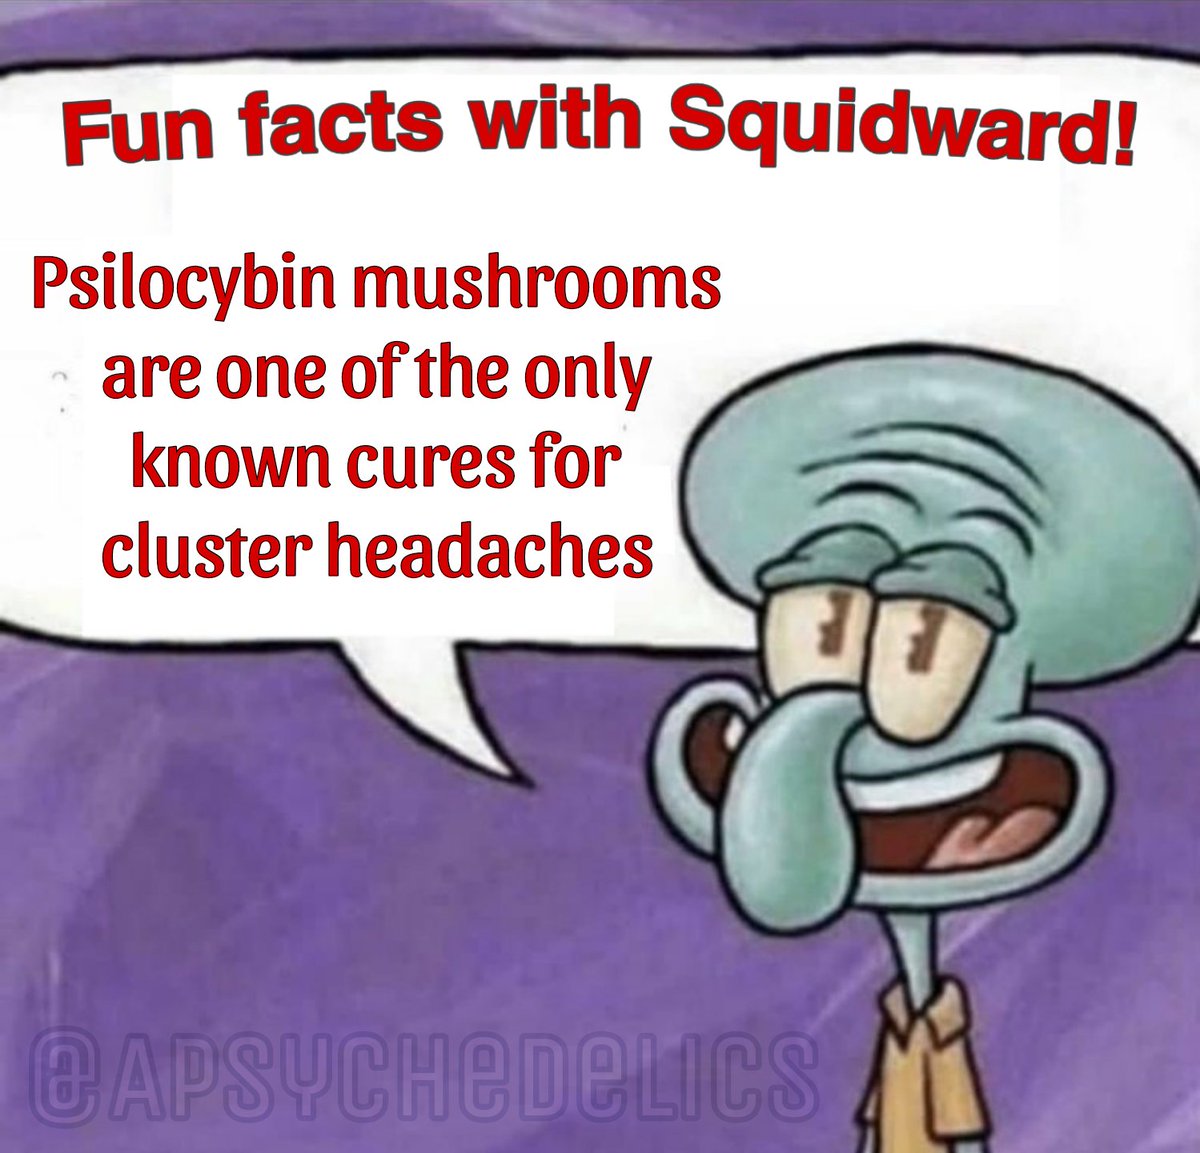 Fun facts with Squidward! 🦑🍄